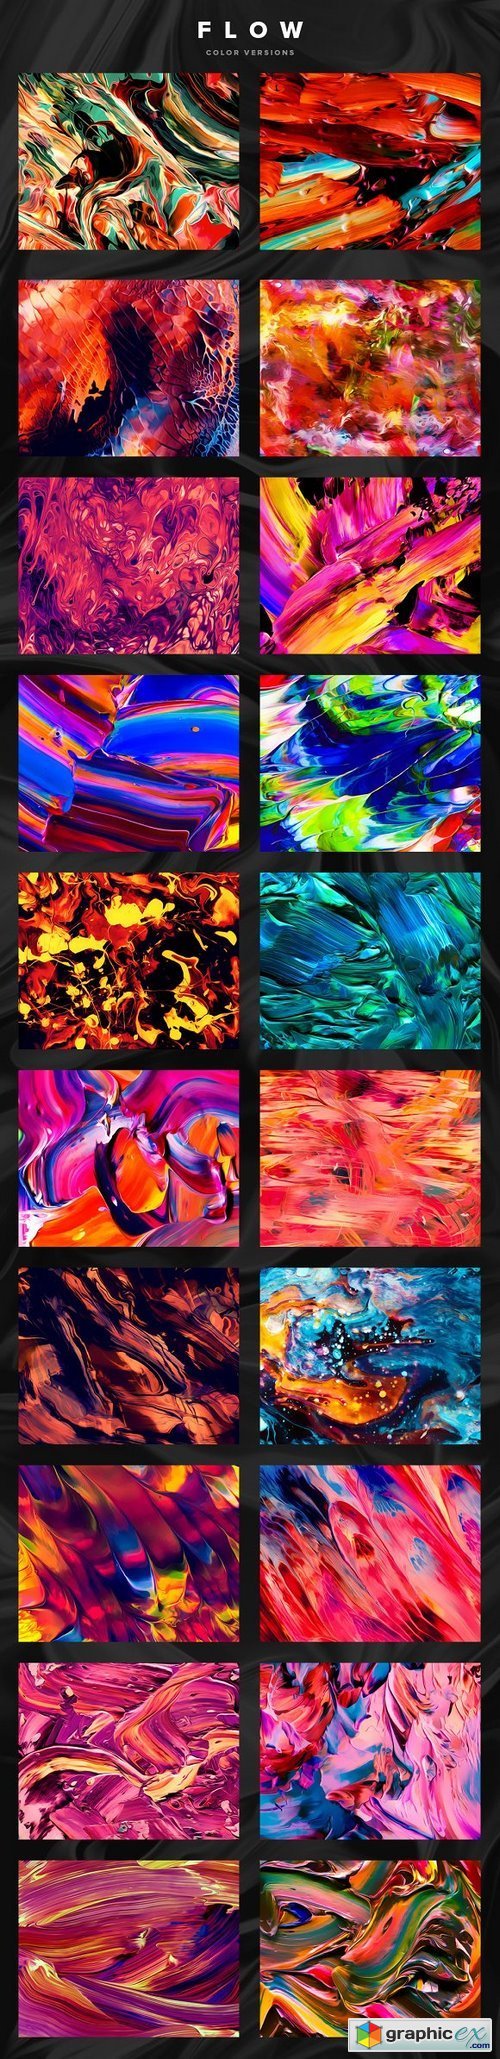 Flow: 100 fluid abstract paintings